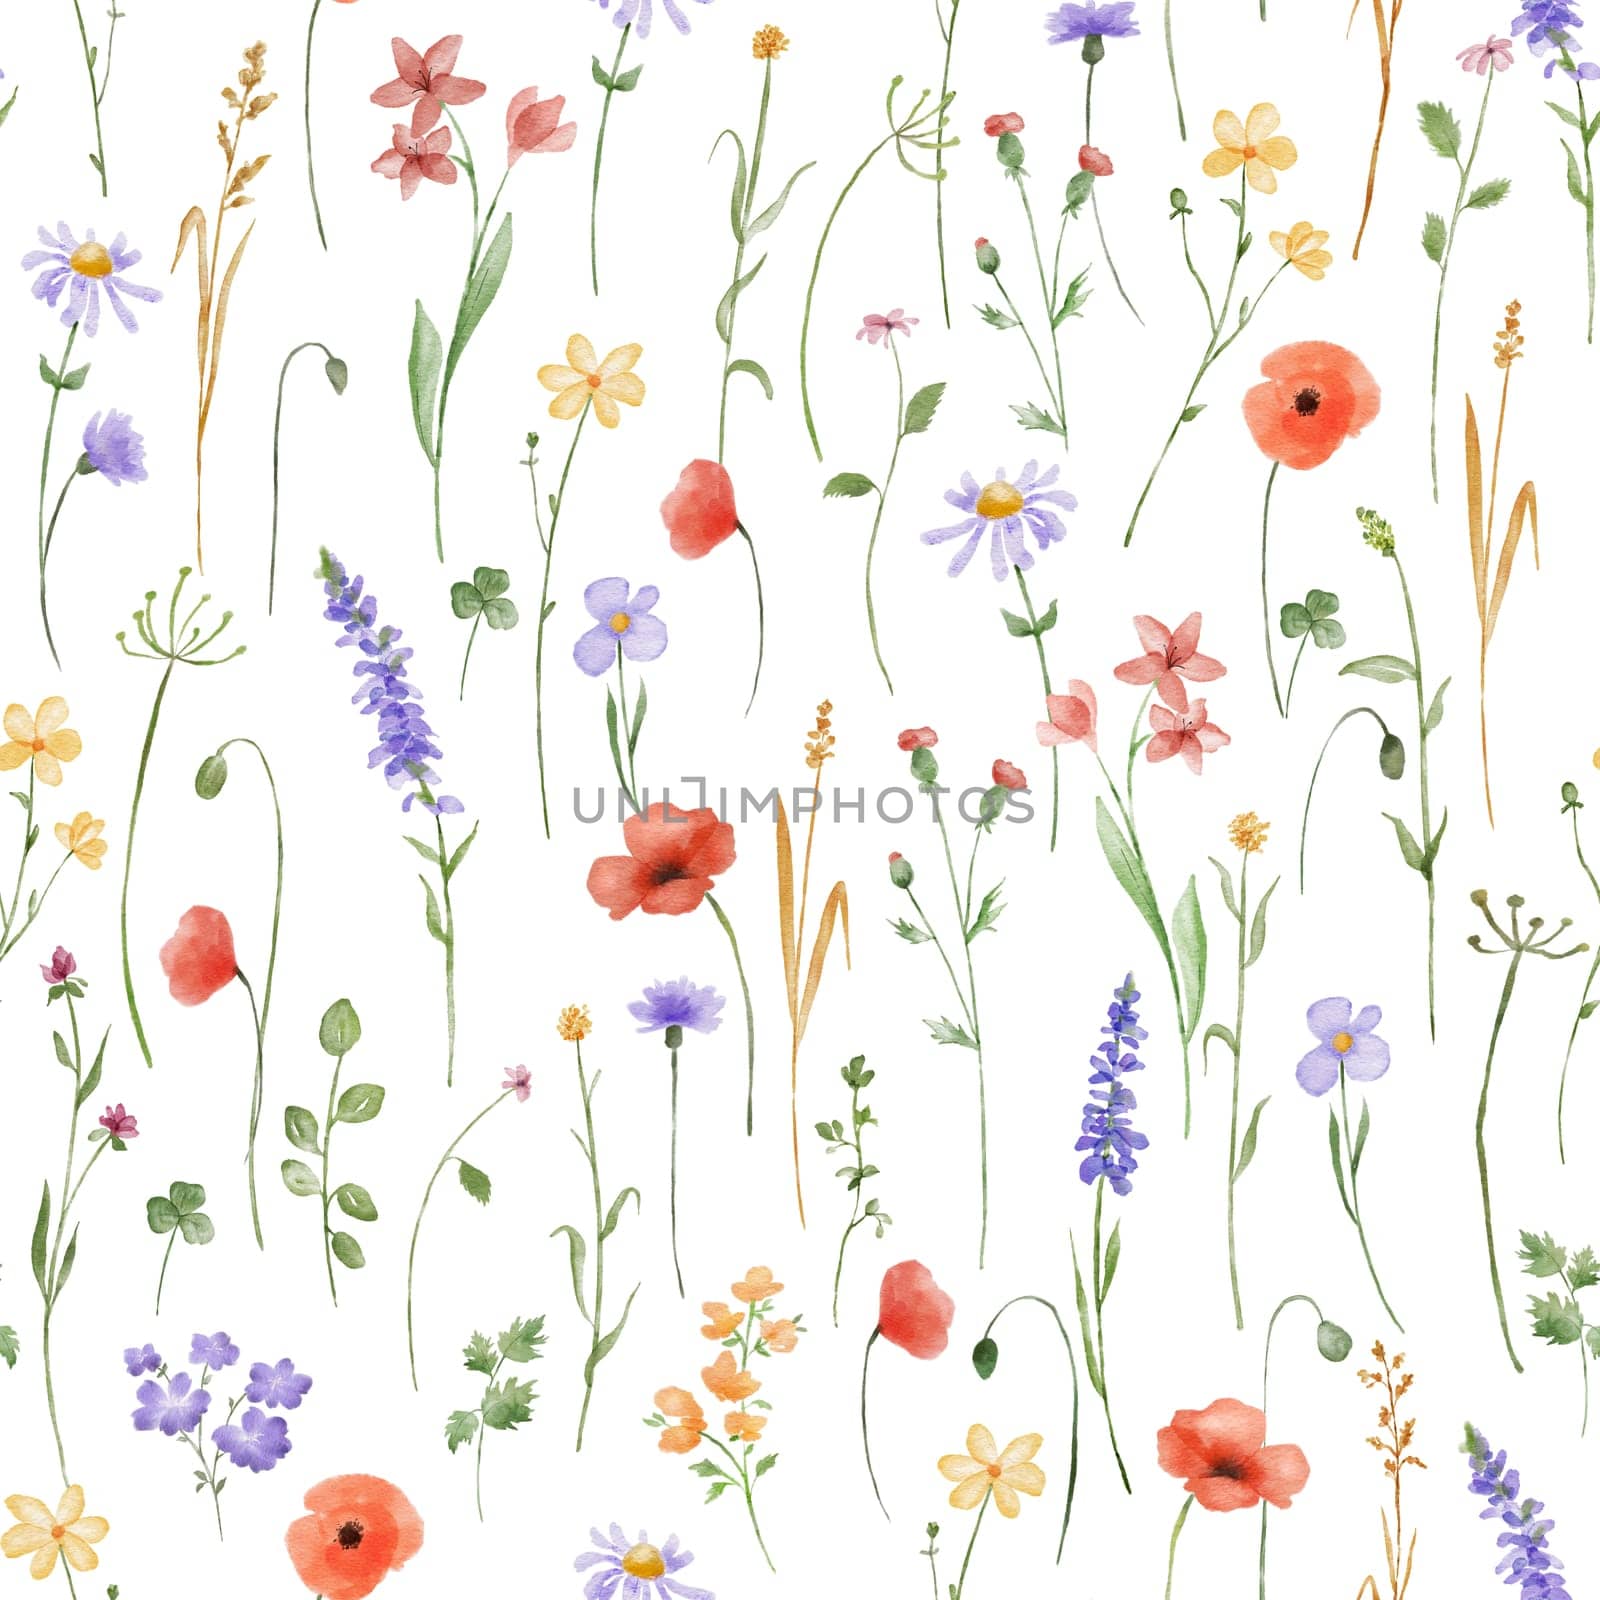 Watercolor floral seamless pattern with flowers poppy and lavender. Spring colorful decor with hand drawn wildflowers on white background by ElenaPlatova